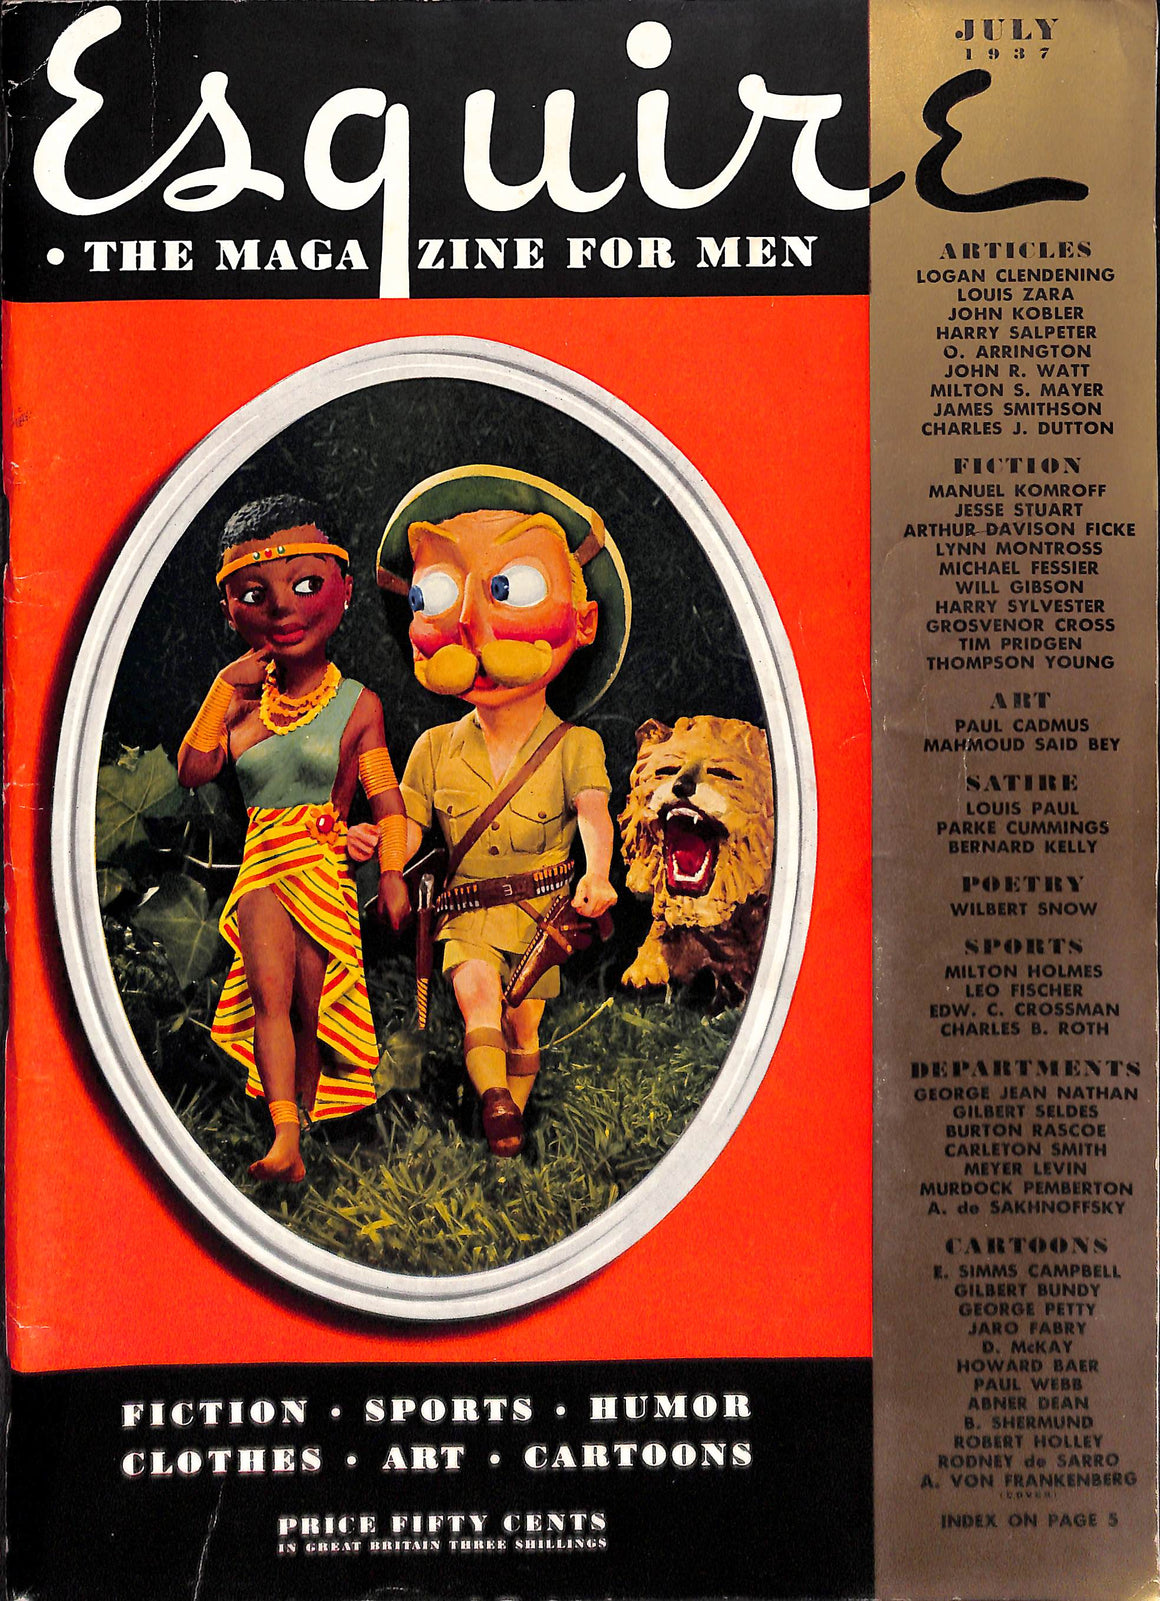 "Esquire The Magazine For Men" August 1937 (SOLD)